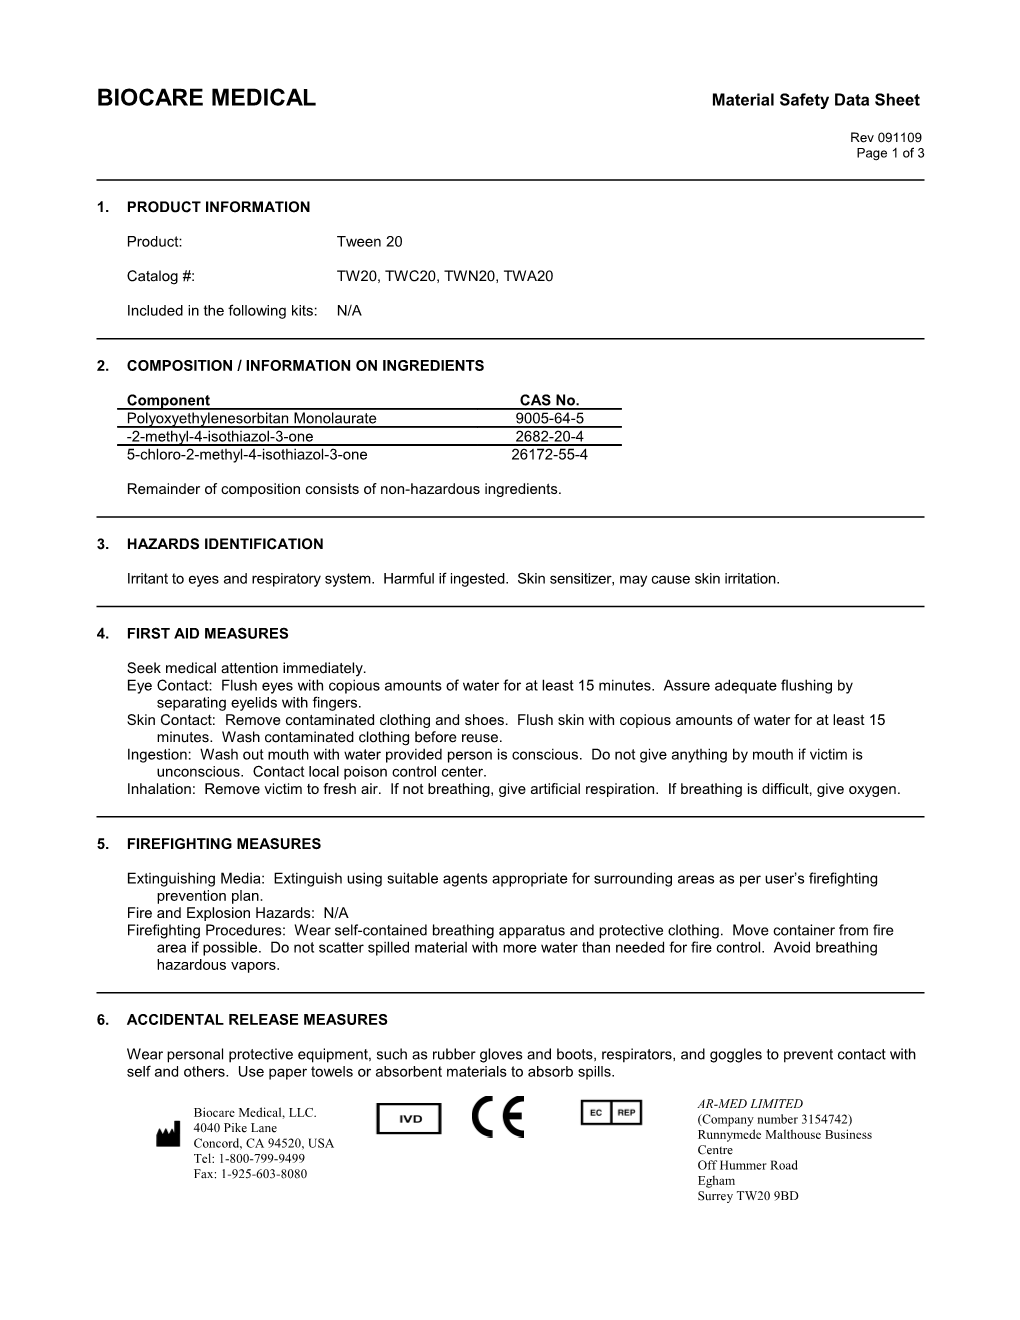 BIOCARE Medicalmaterial Safety Data Sheet